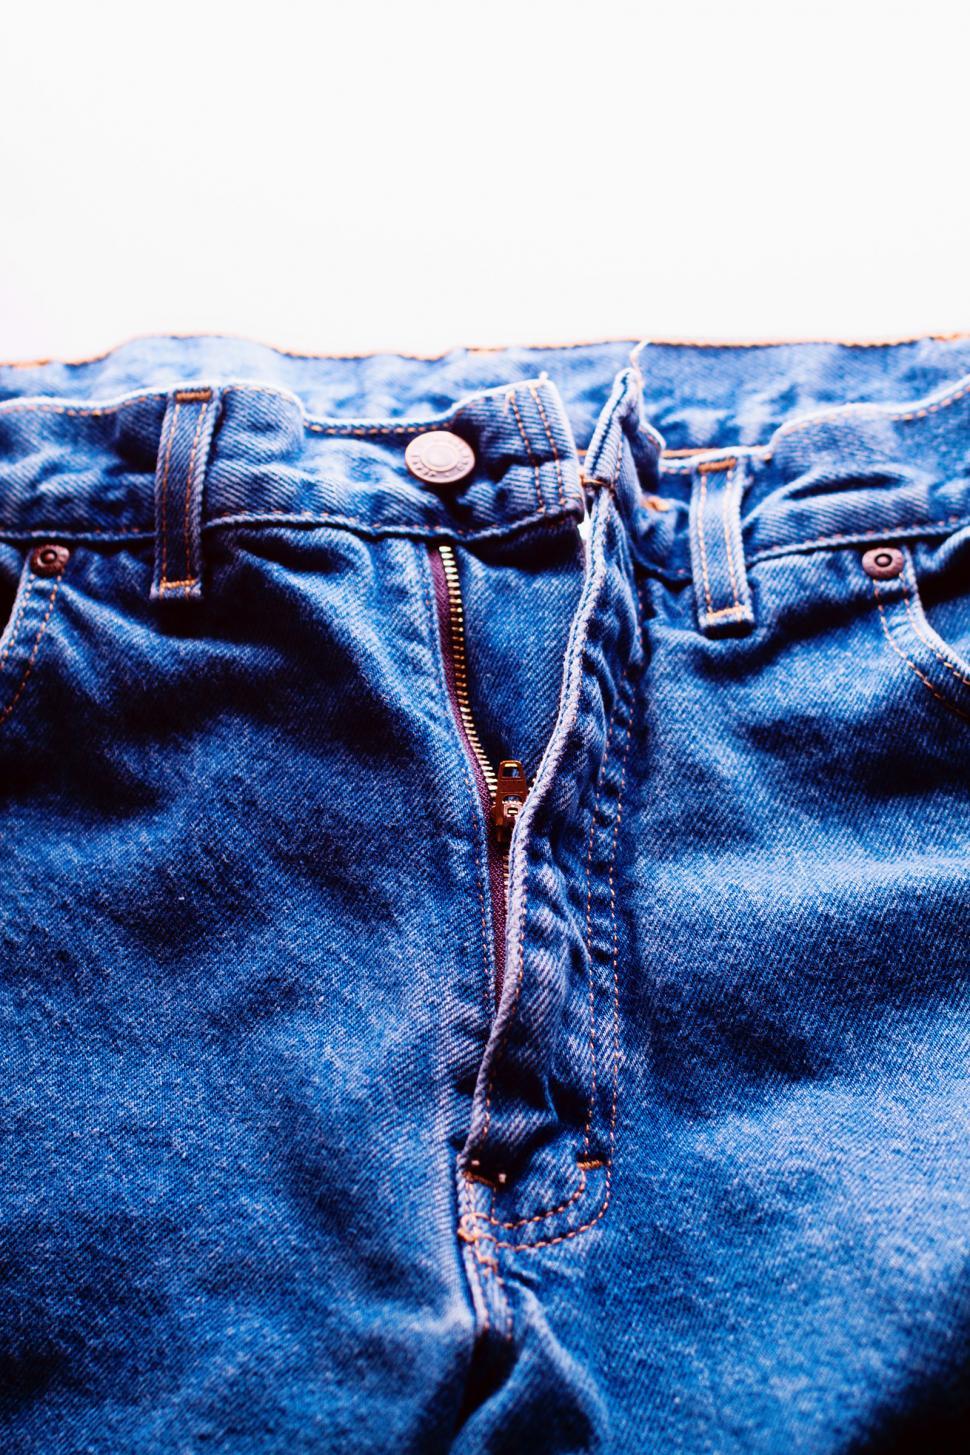 Free Image of Jeans 